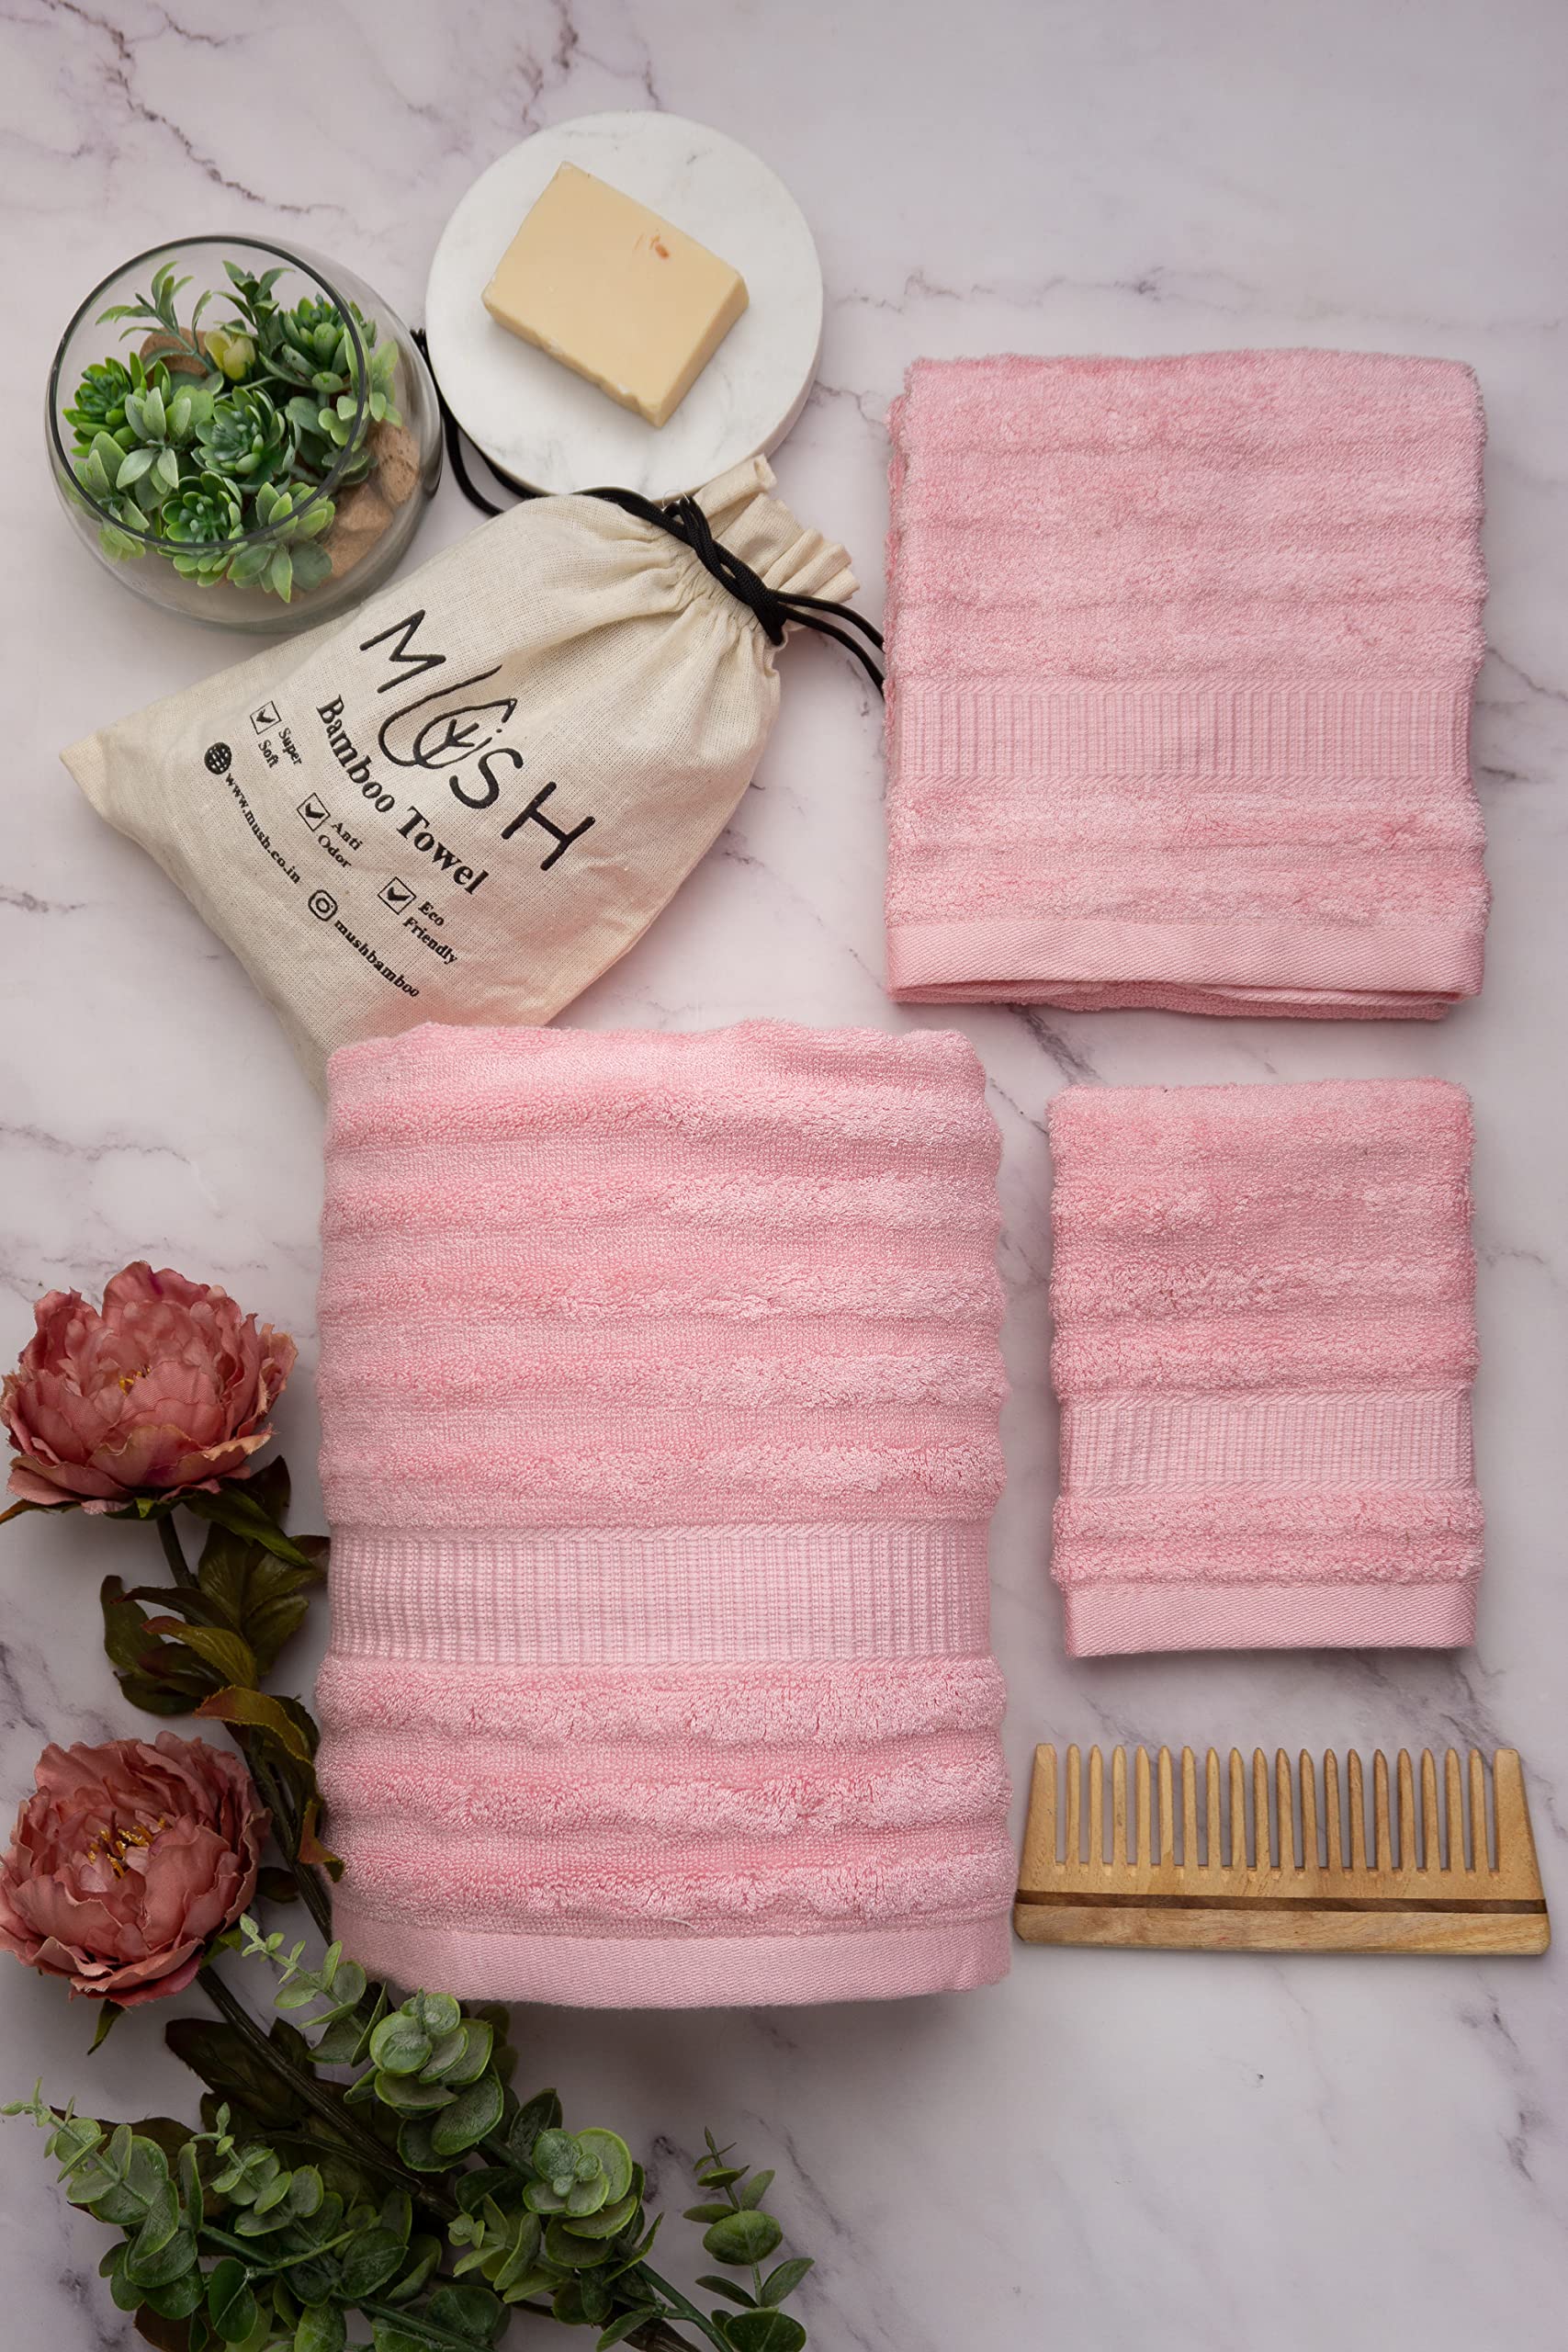 Mush Bamboo Towels for Bath Large Size | 600 GSM Bath Towel for Men & Women | Soft, Highly Absorbent, Quick Dry,and Anti Microbial | 75 X 150 cms (Pack of 1, Pink)